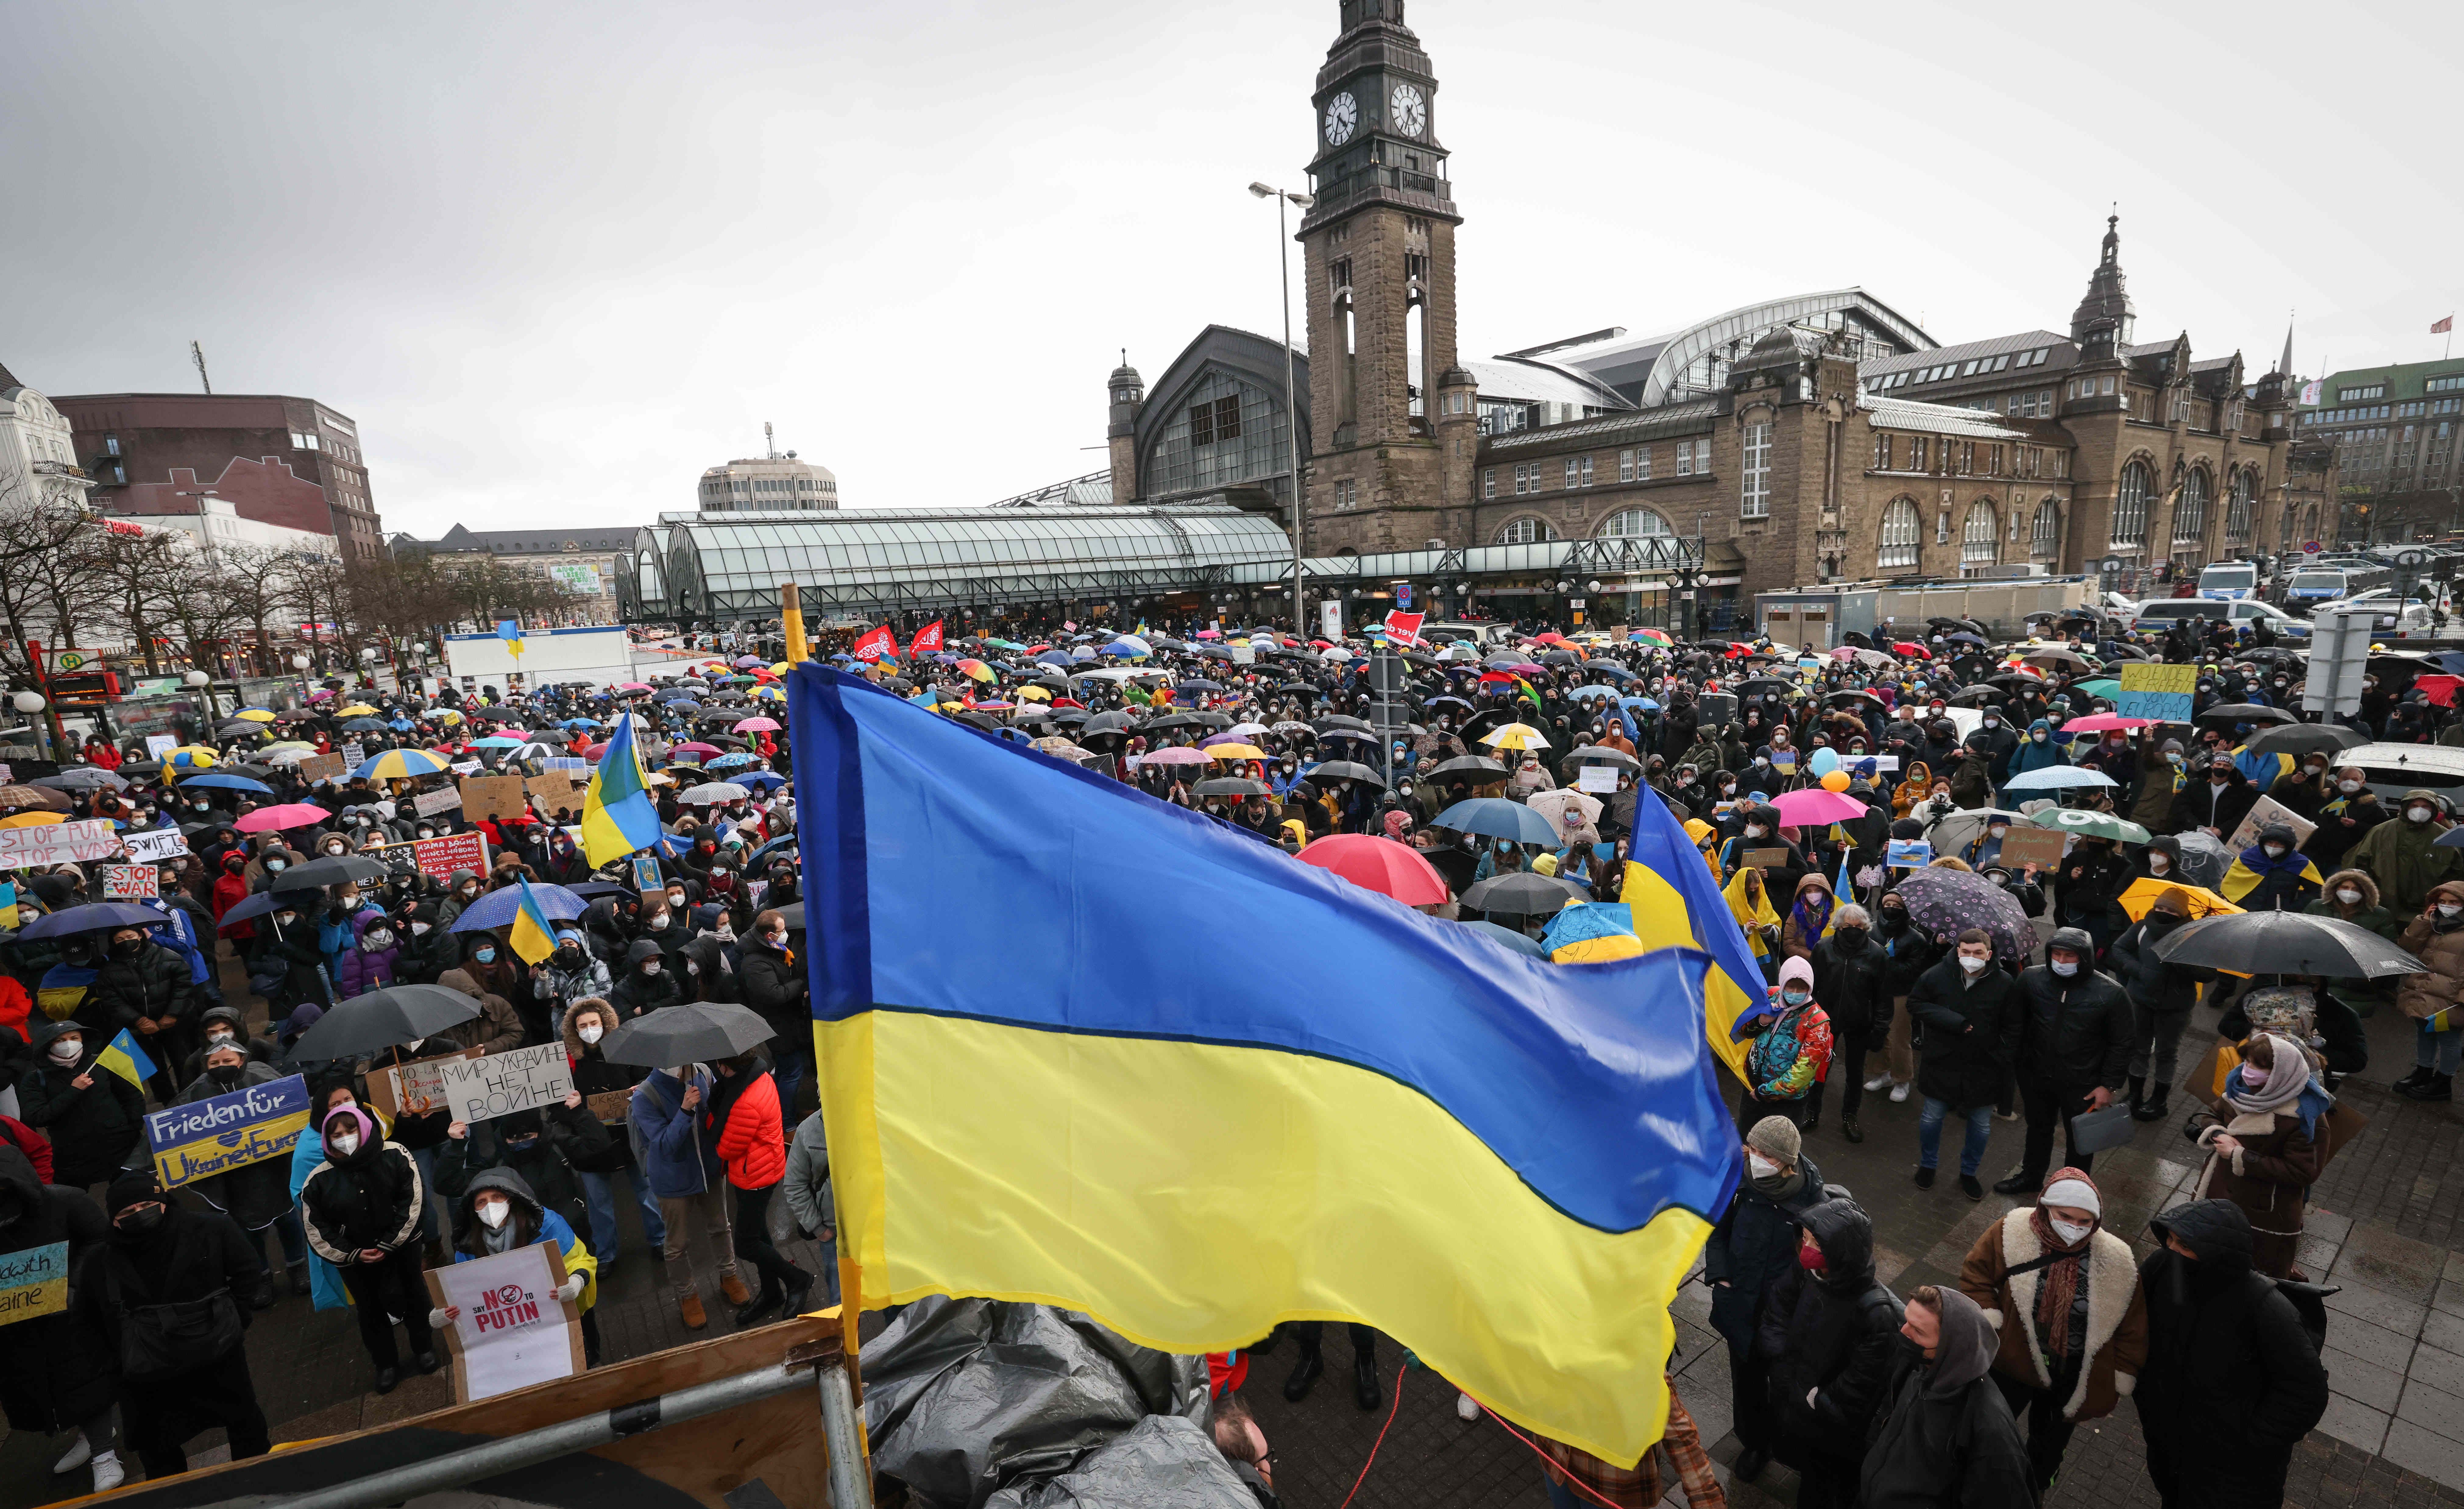 Photo of people holding umbrellas in the rain as a Ukraine flag is waved overhead